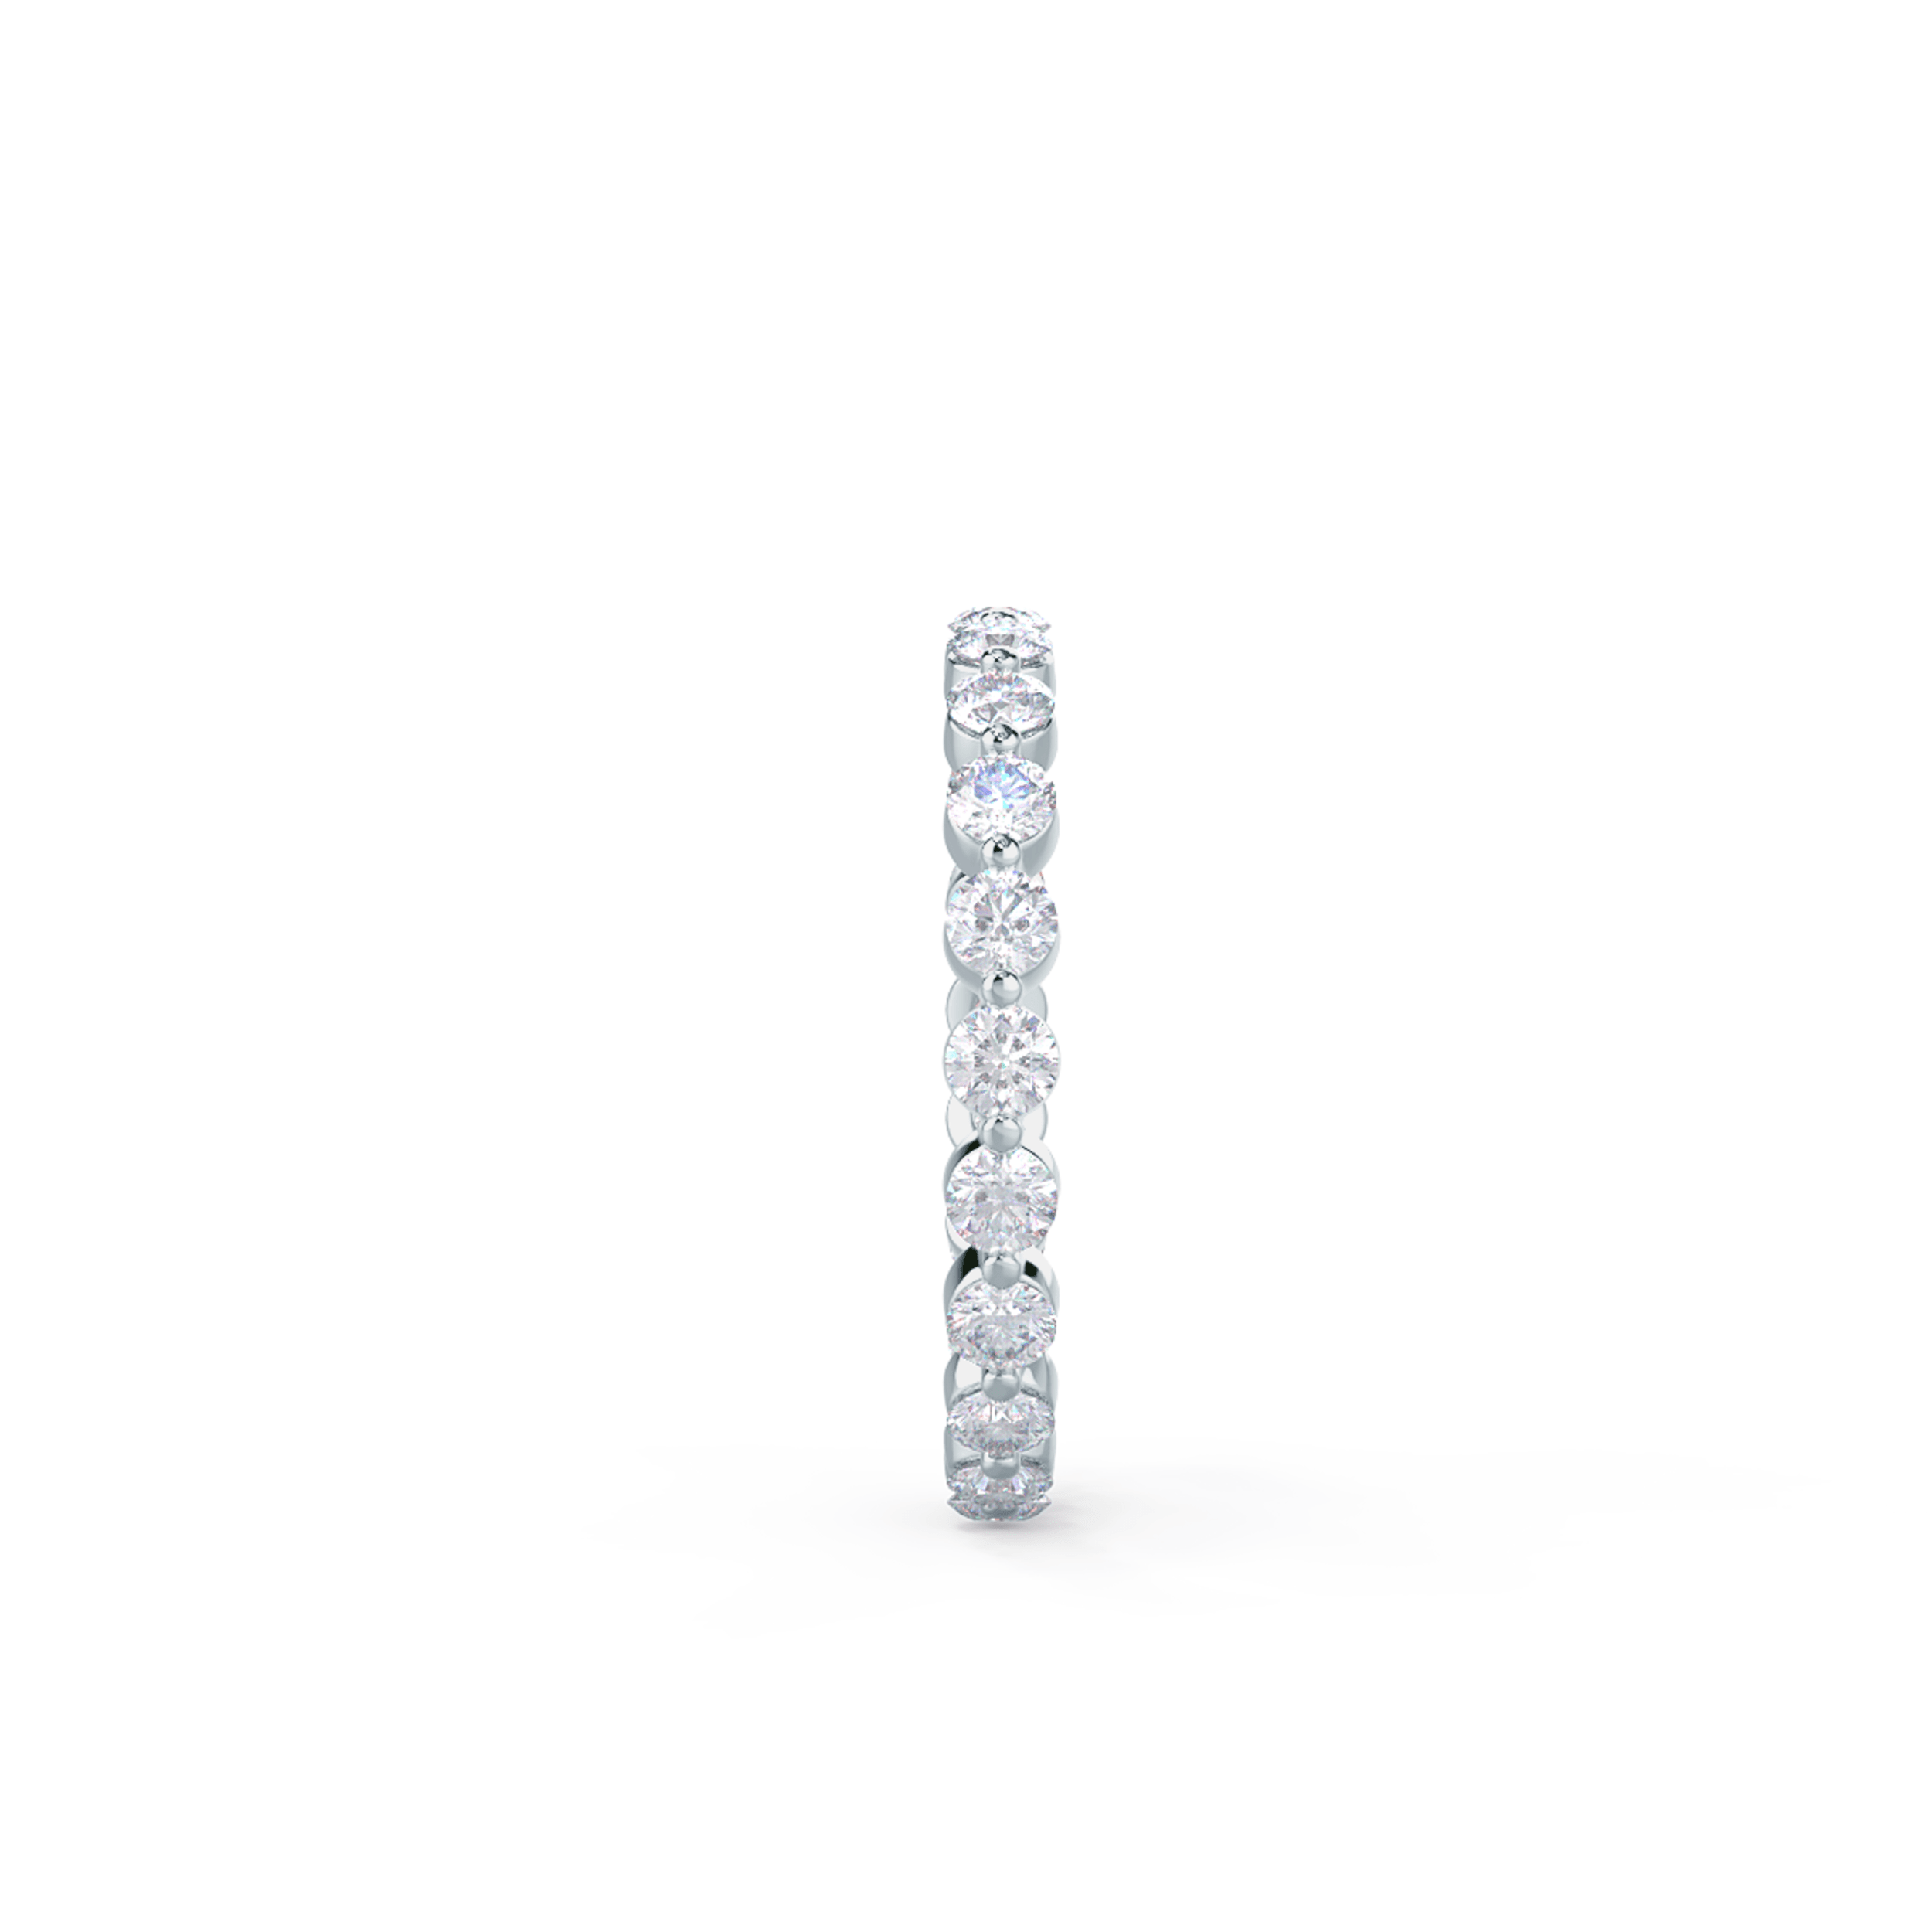 1.0 Carat Round Brilliant Synthetic Diamonds Shared Prong Eternity Band in 18k White Gold (Side View)